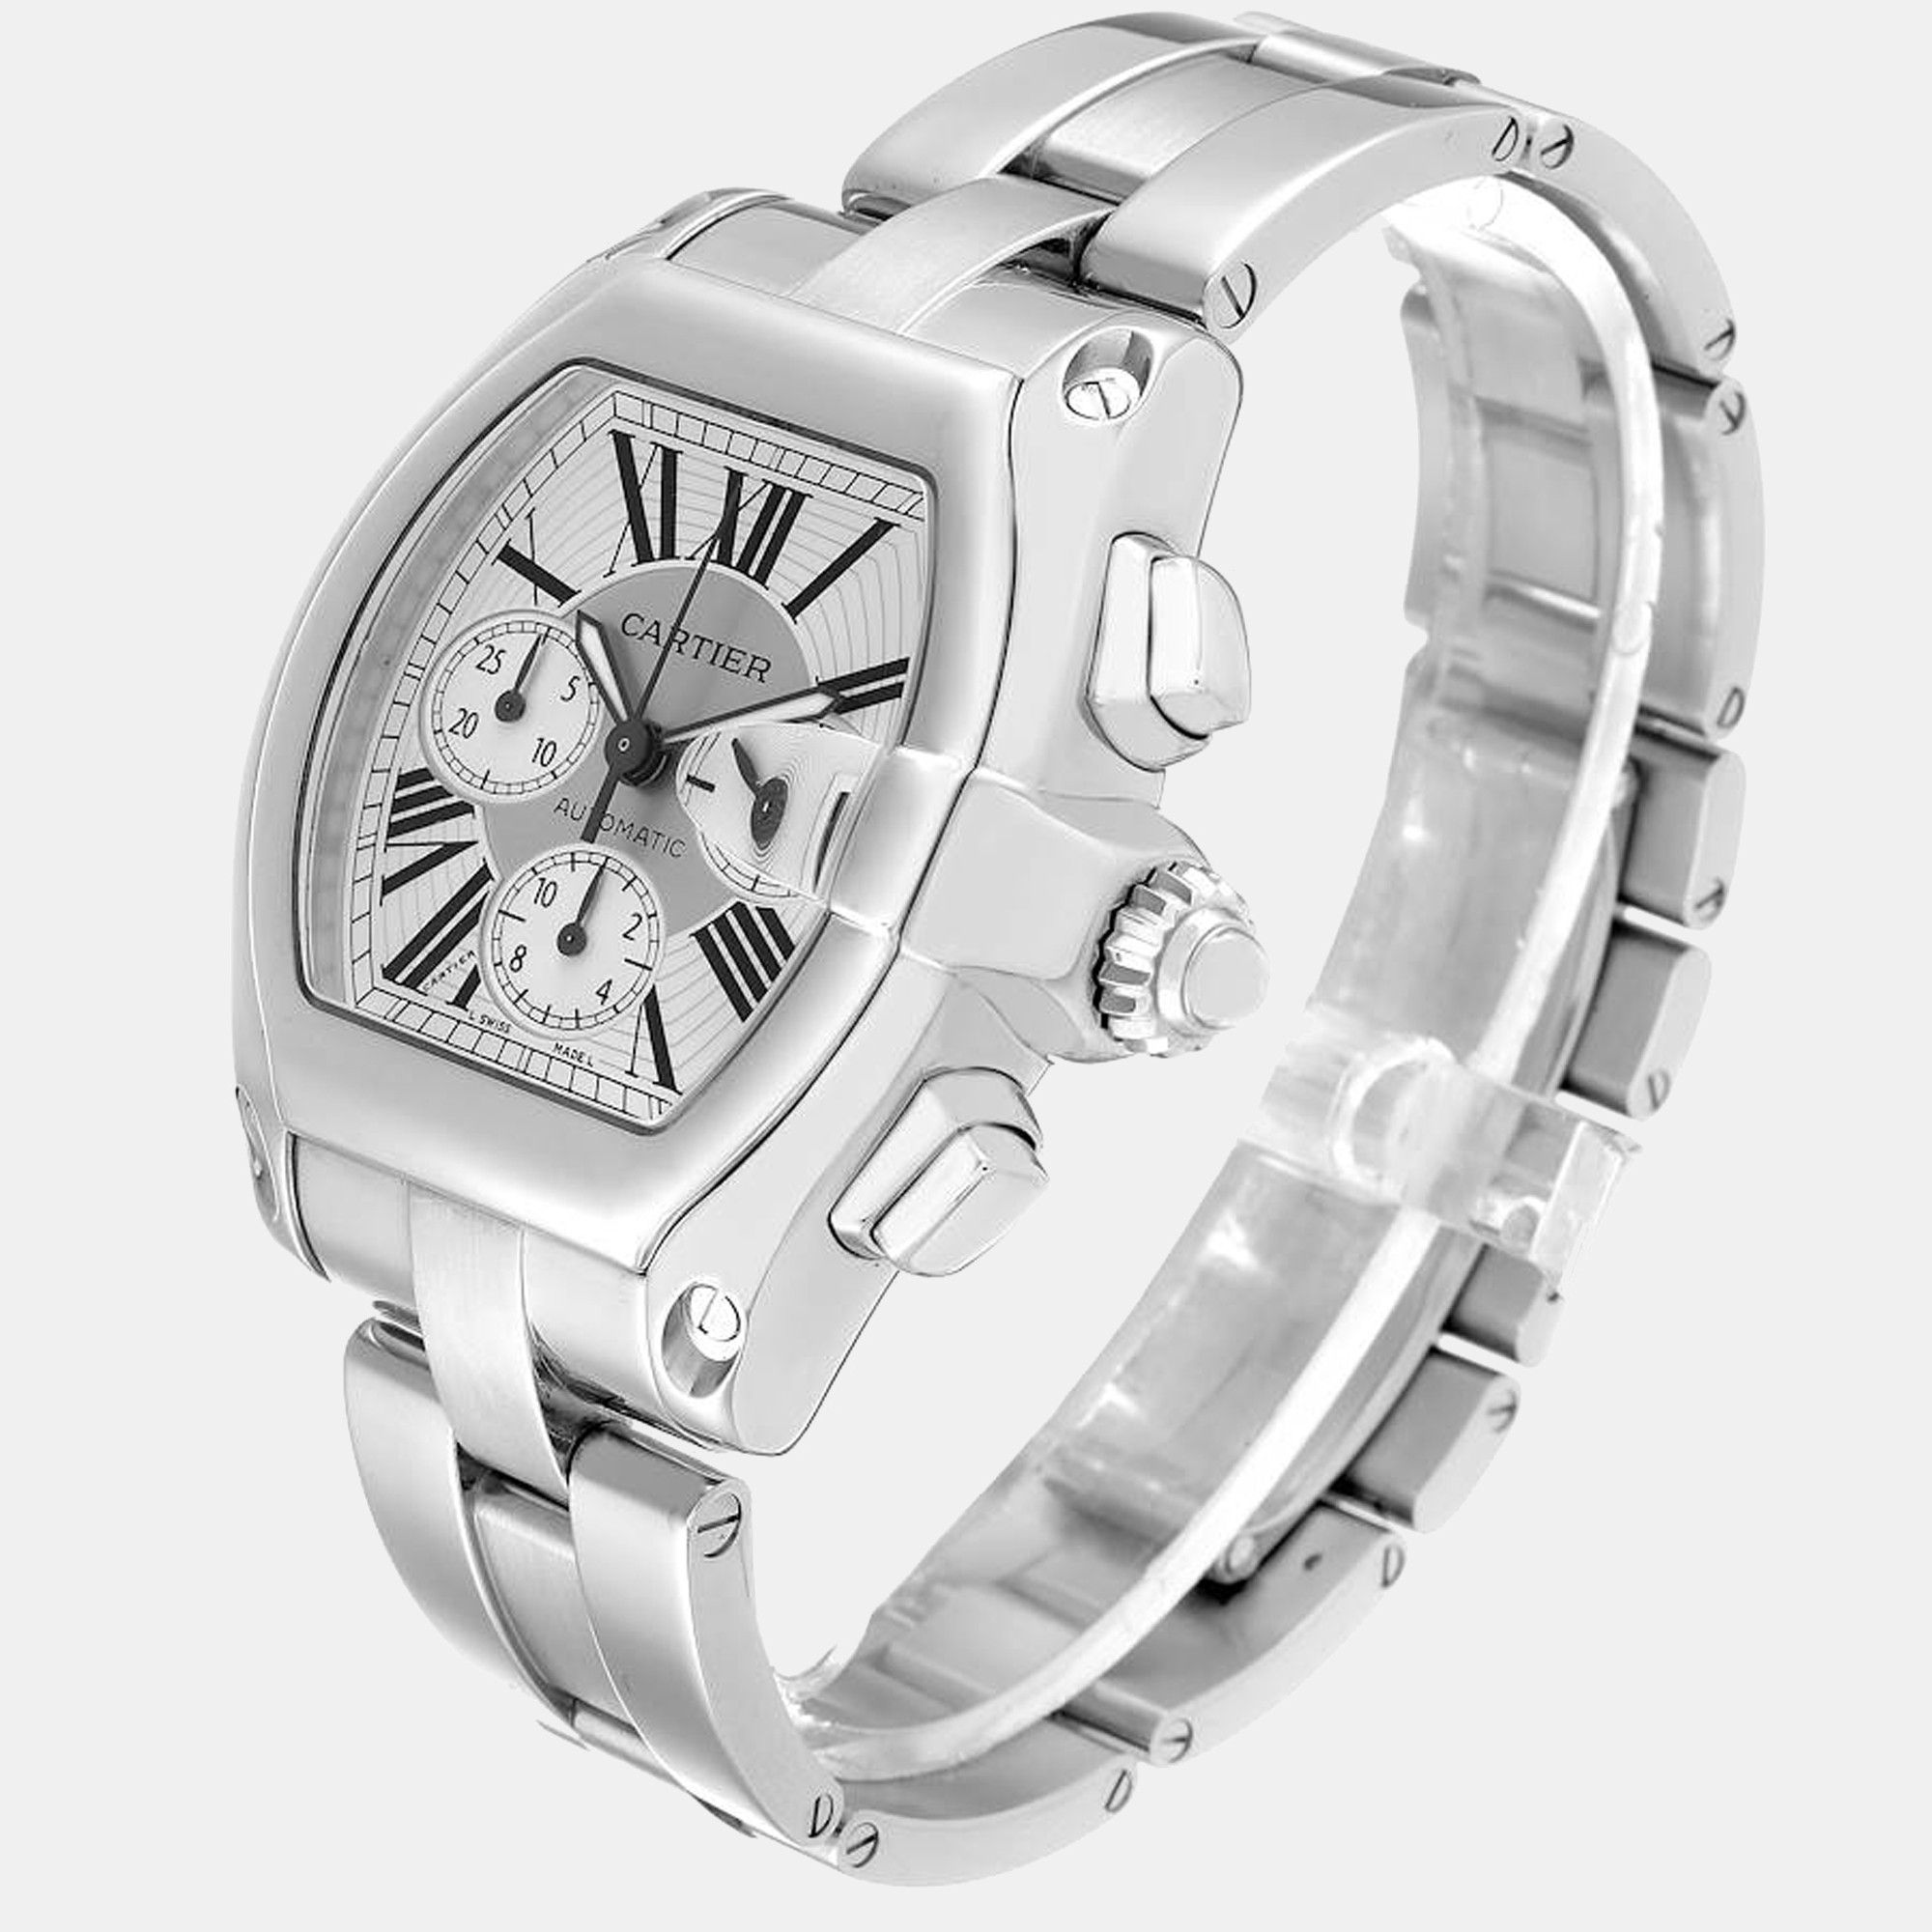 Cartier Roadster XL Chronograph Silver Dial Steel Mens Watch W62019X6